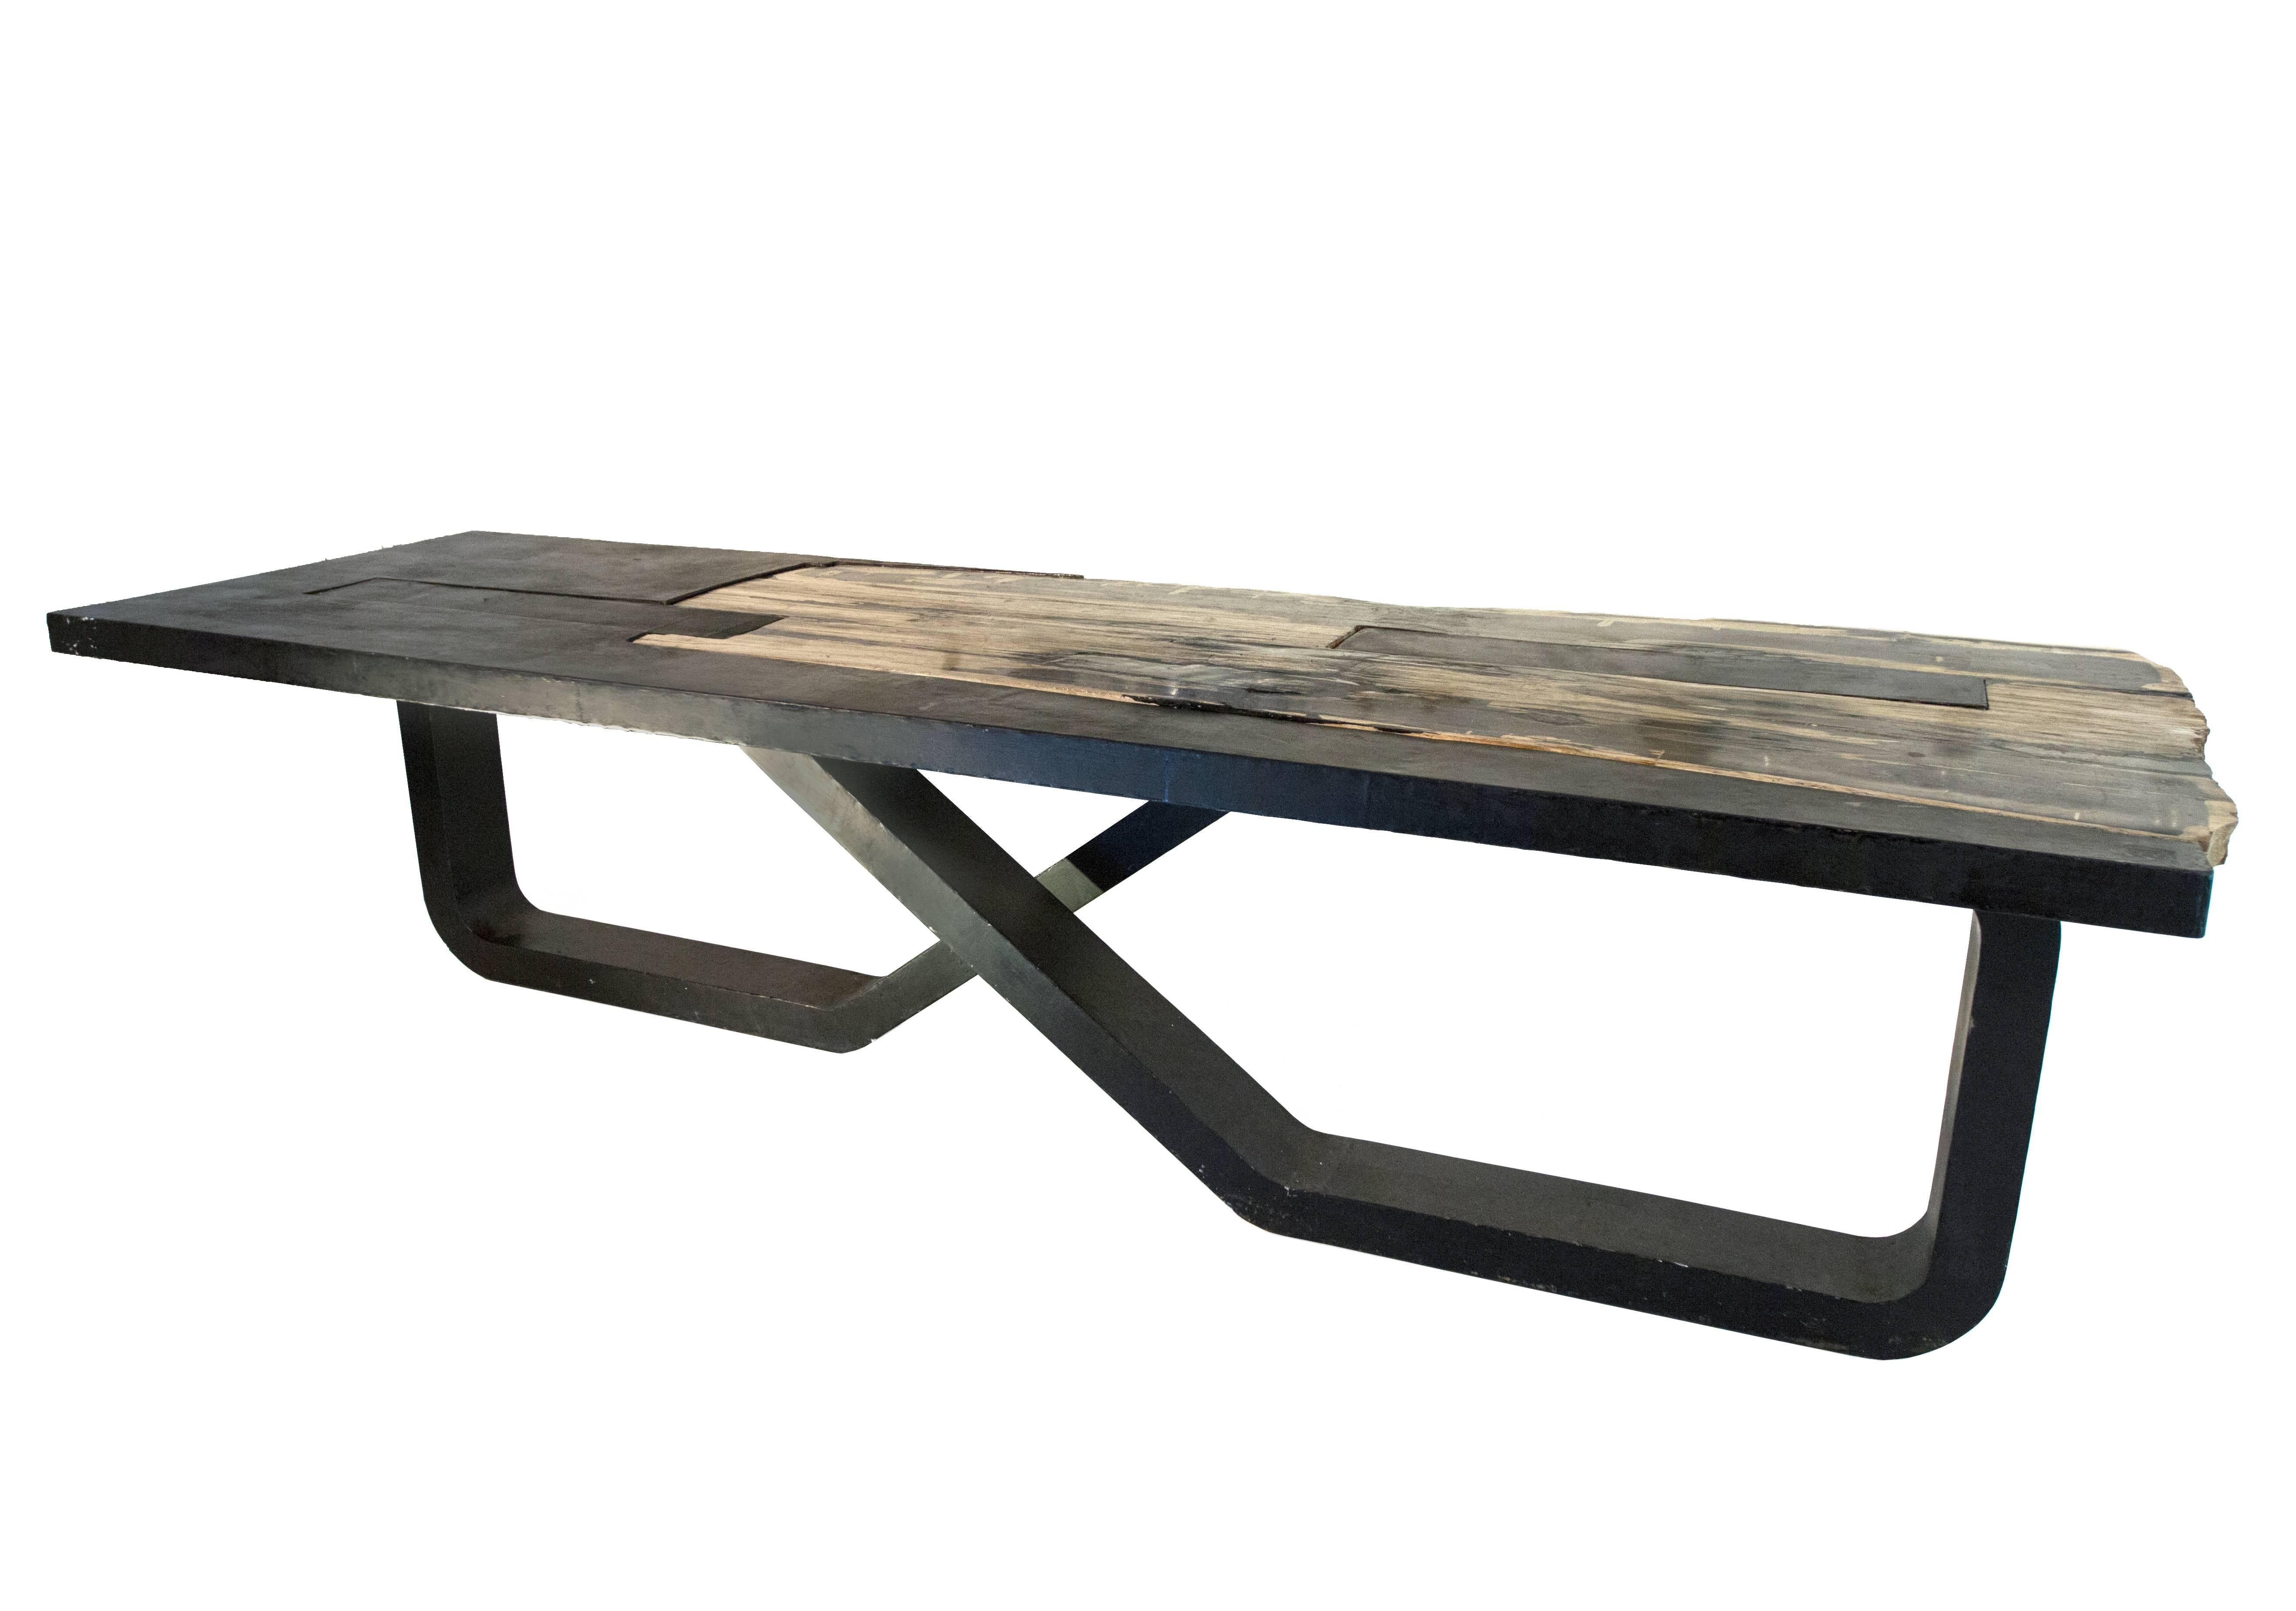 This unique infinity table is made to order and one of a kind. The weight of the slab keeps the table connected as the two infinity legs are not connected to one another. This four piece table is a statement piece for any interior.

With a steel